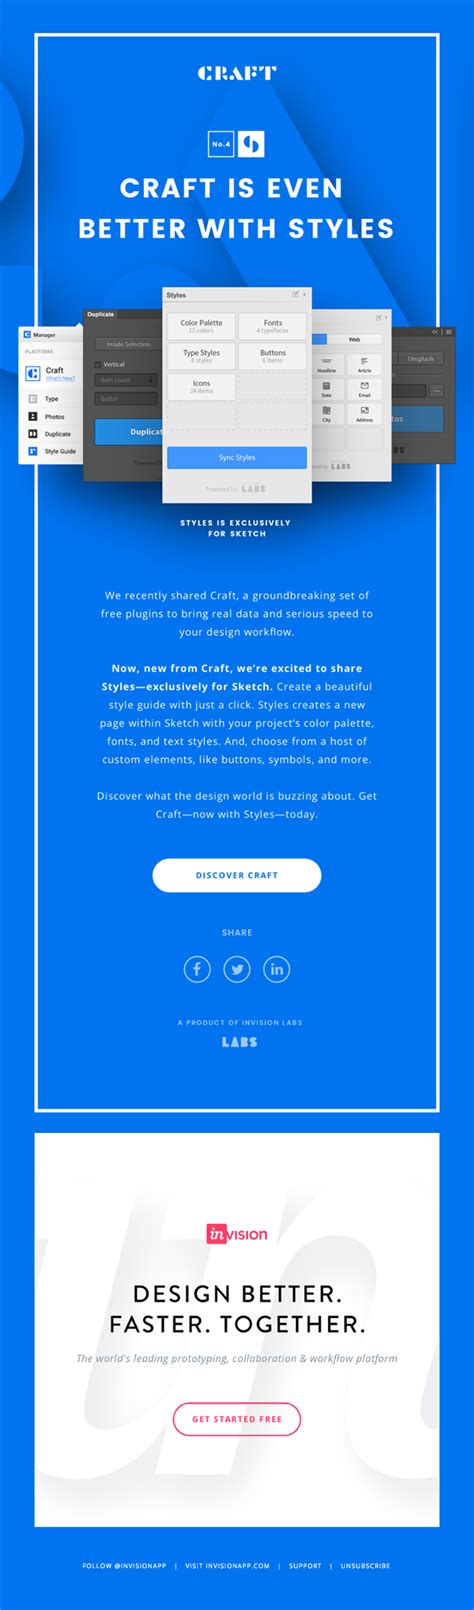 Email Template Design Email Newsletter Design Email Templates